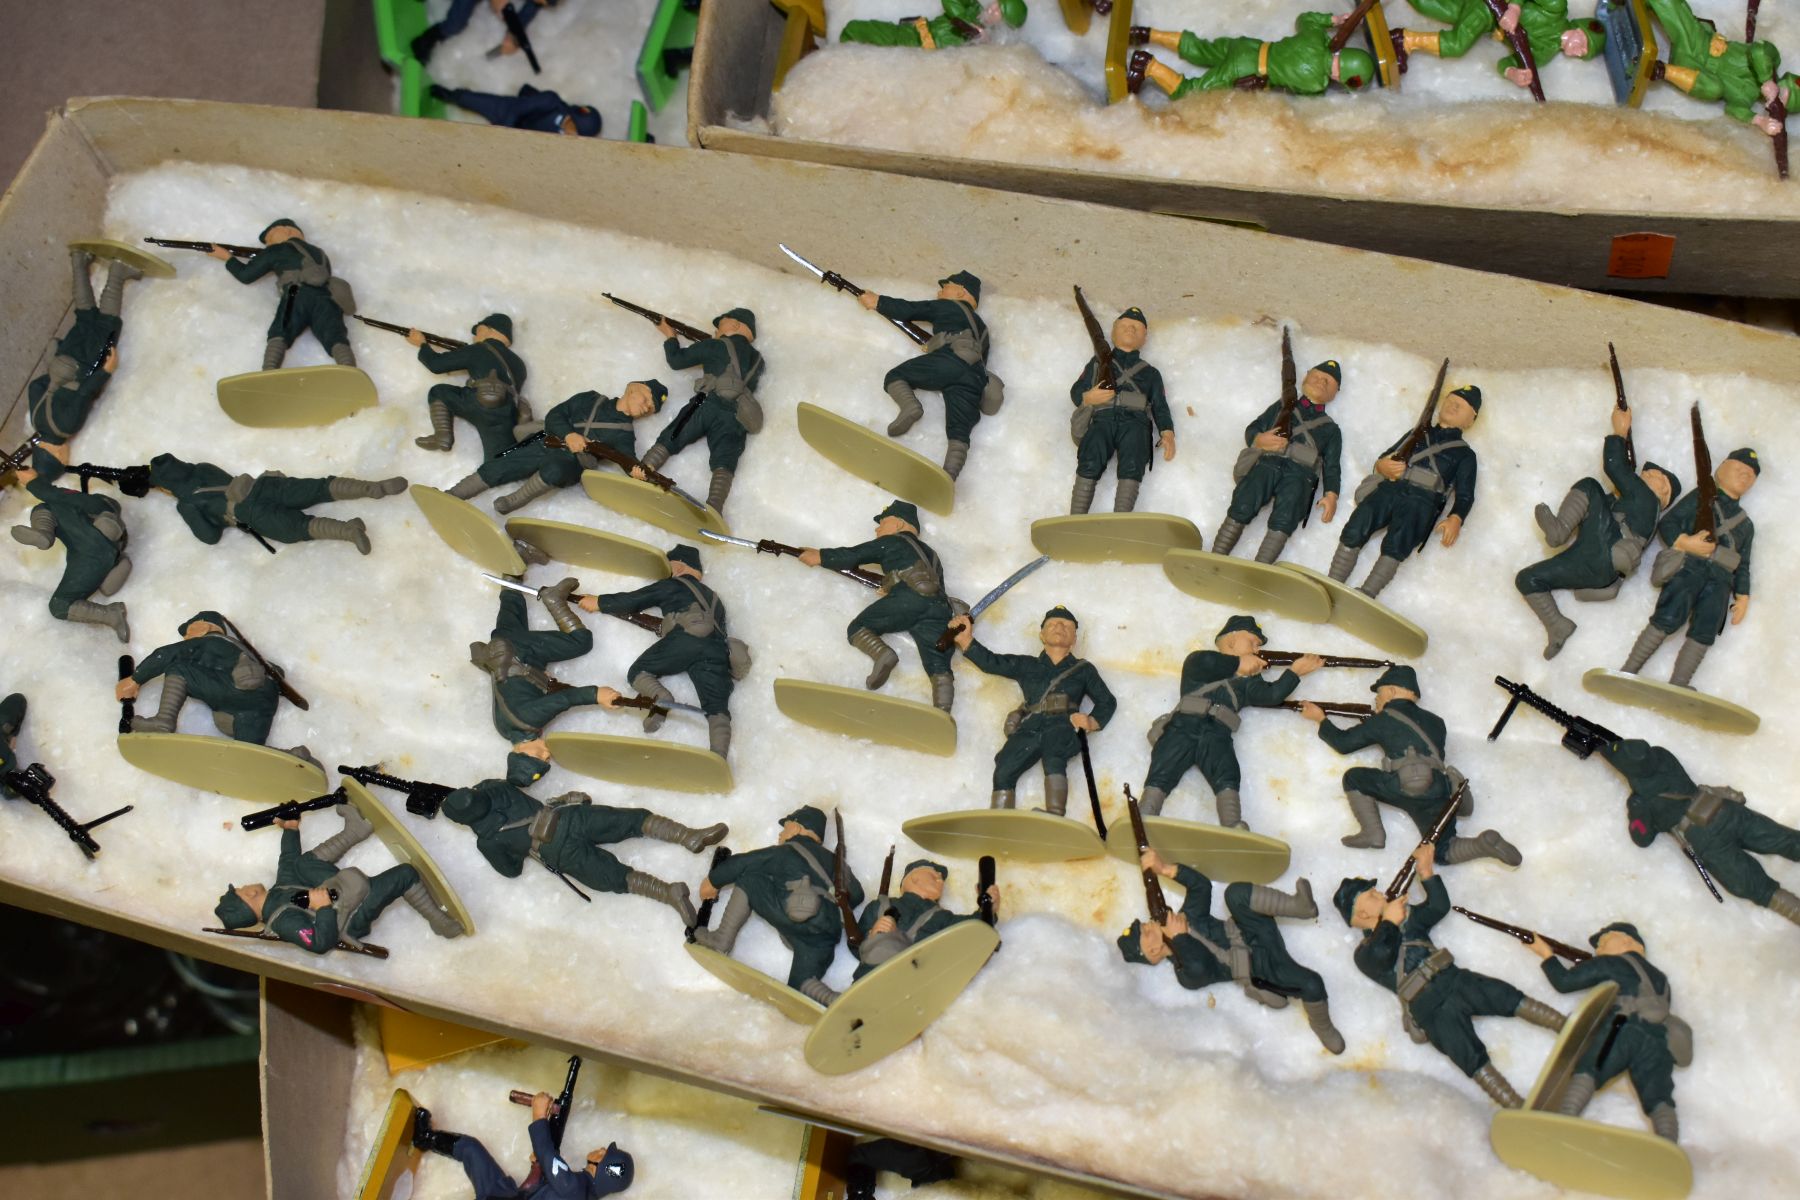 A QUANTITY OF BRITAINS AND AIRFIX 1/32 SCALE SOLDIER FIGURES, many have been painted and detailed to - Image 2 of 13